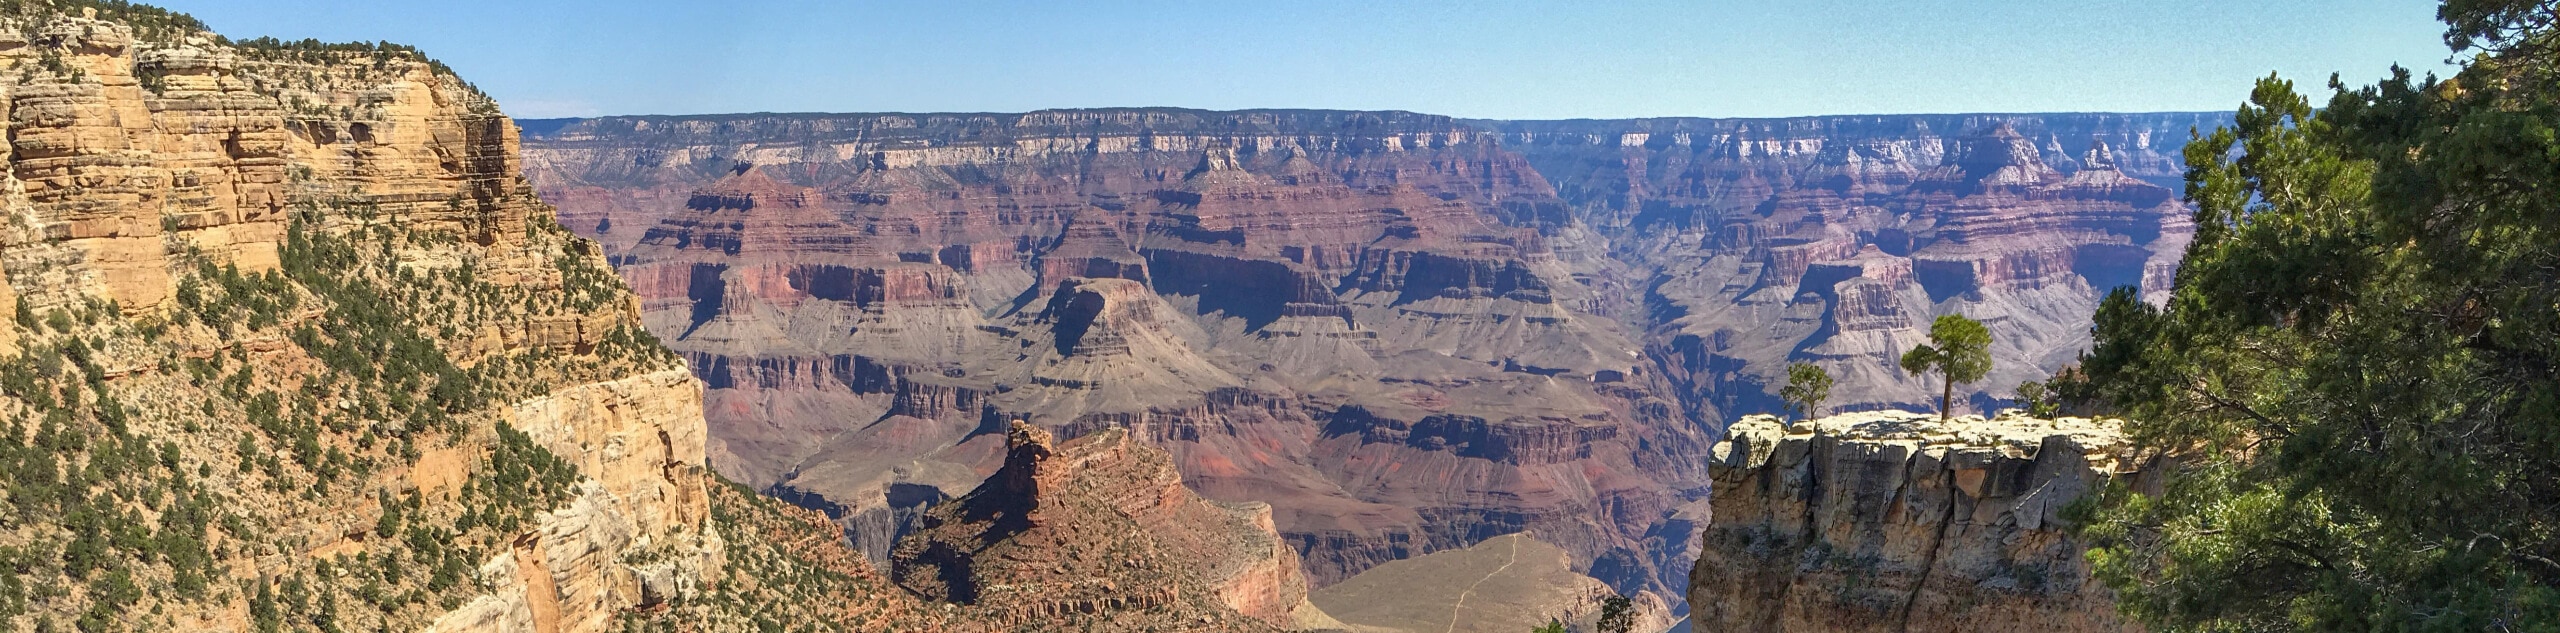 1.5-Mile Resthouse via Bright Angel Trail